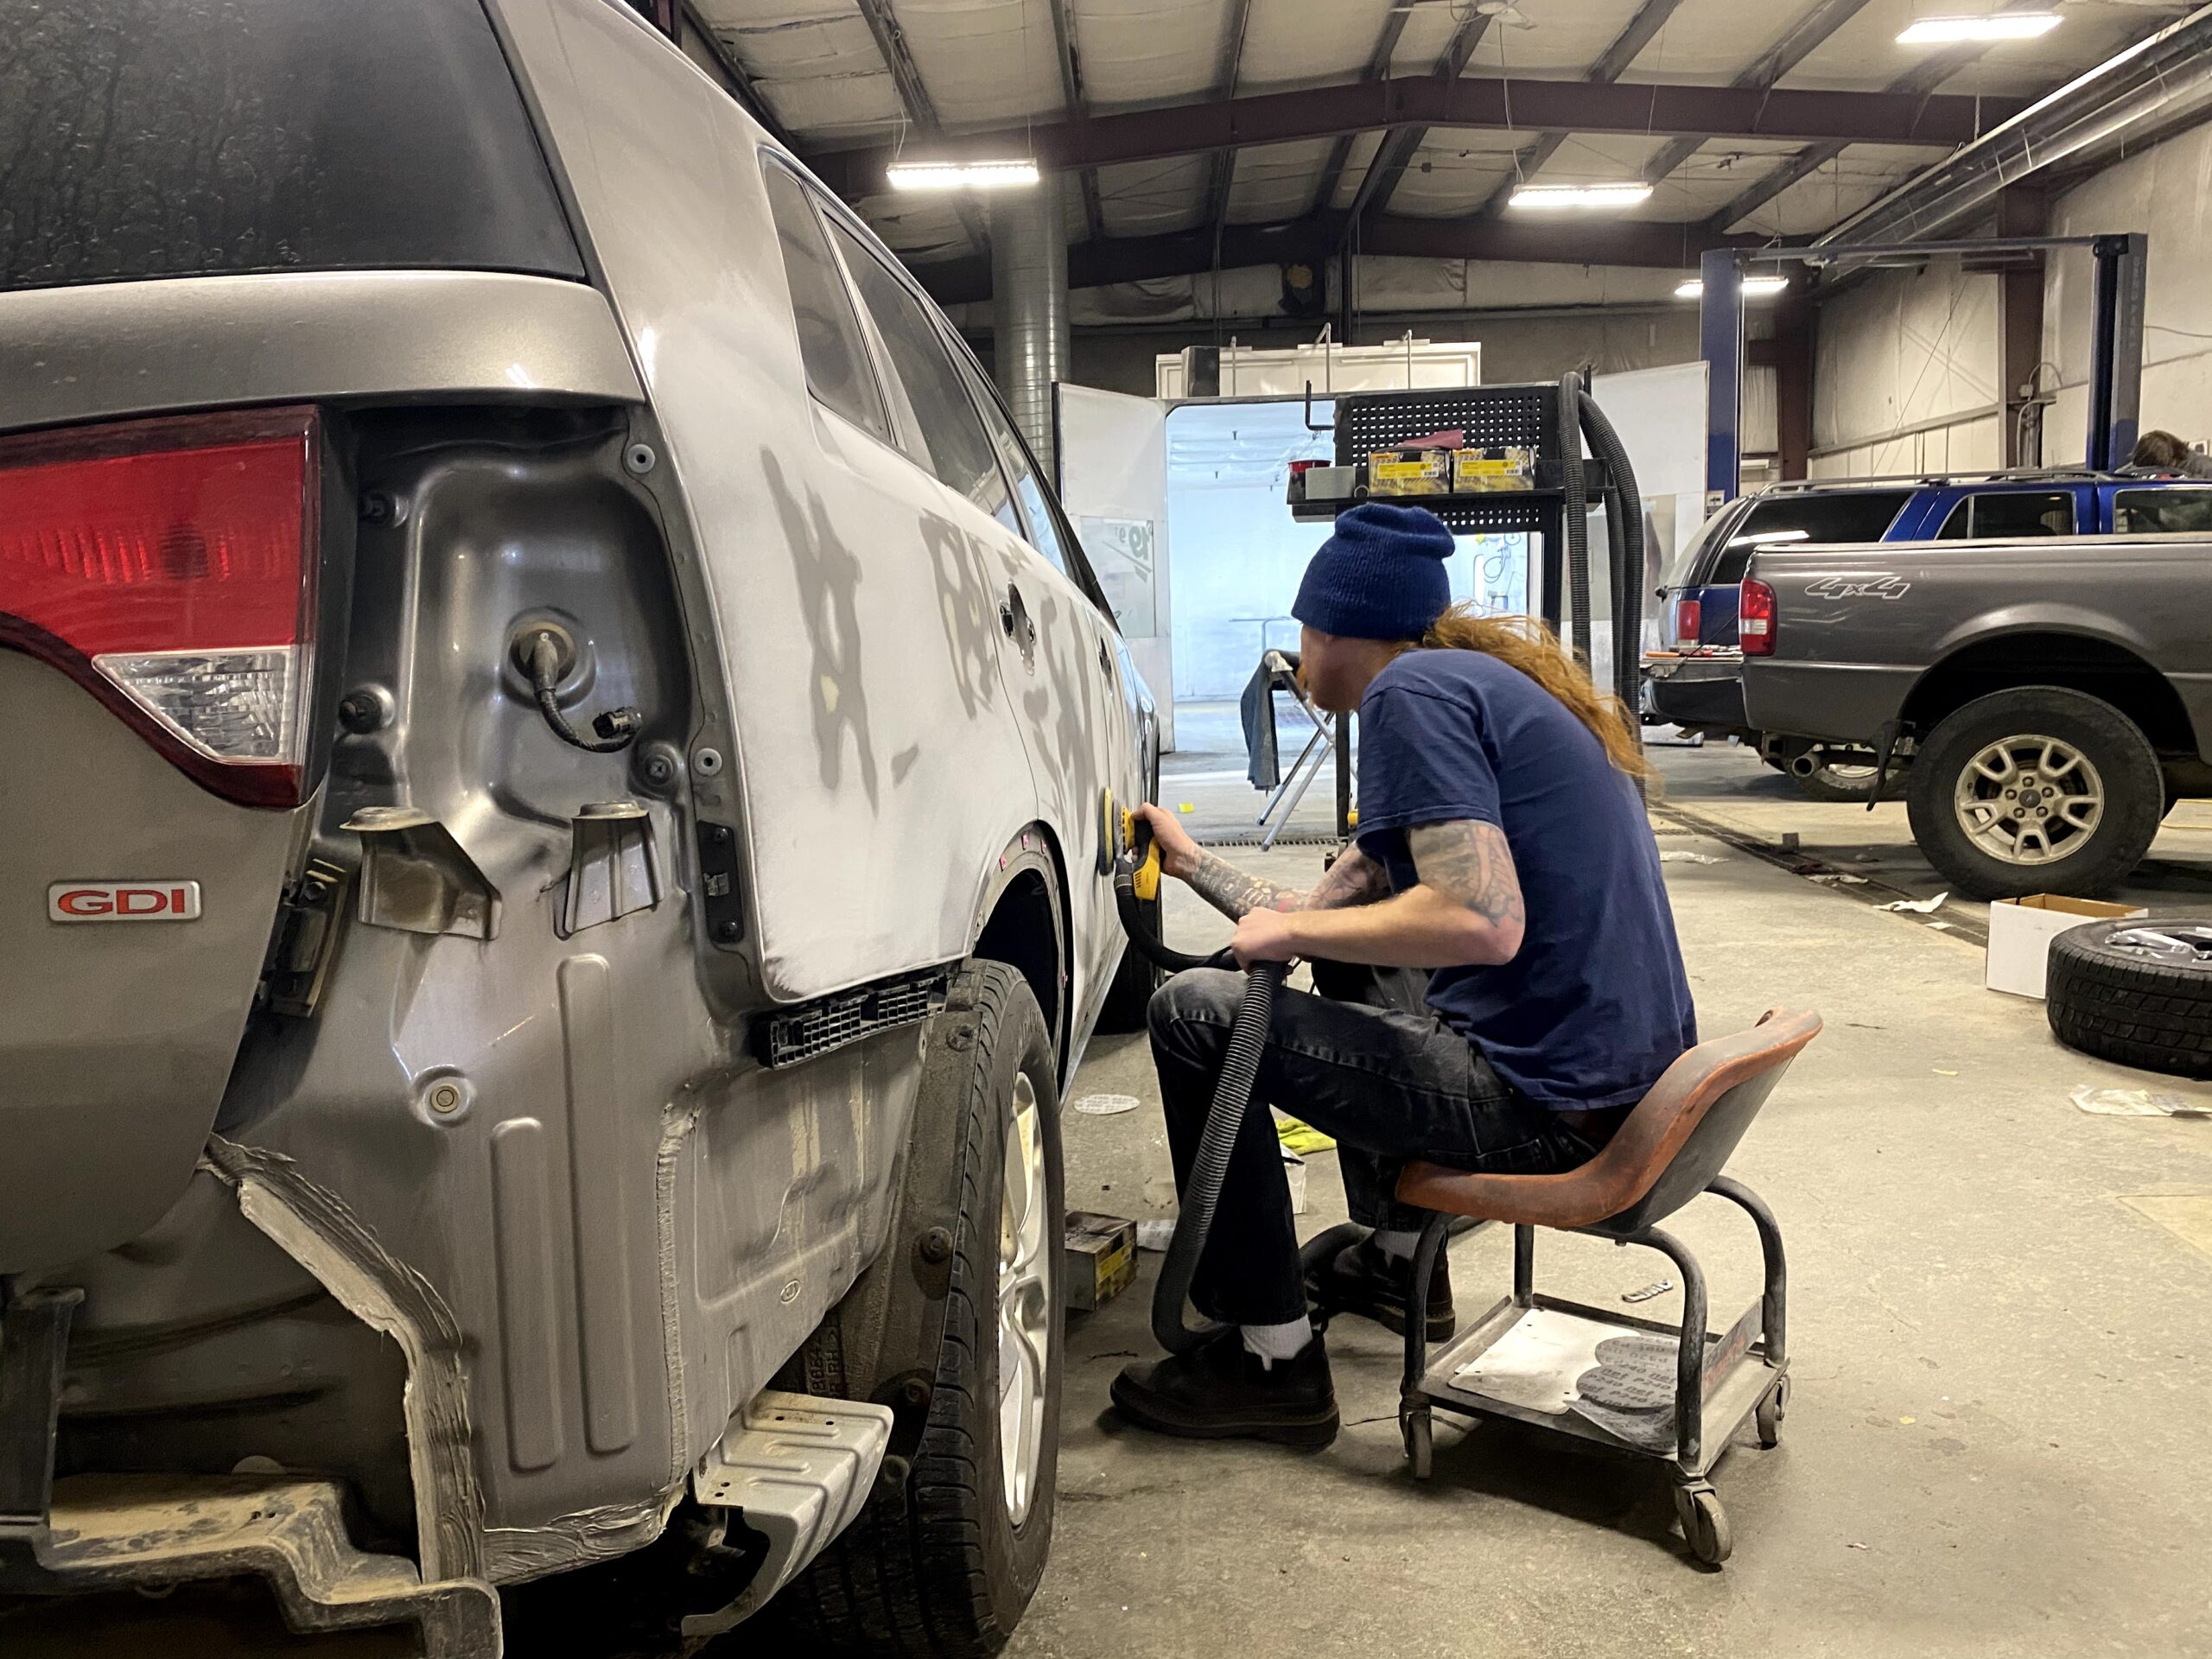 Space for Auto Body Damage at serviced Here for All Of their Autobody Needs Pullman's Auto Body Super Center Tow Truck Service for Auto Body Repair